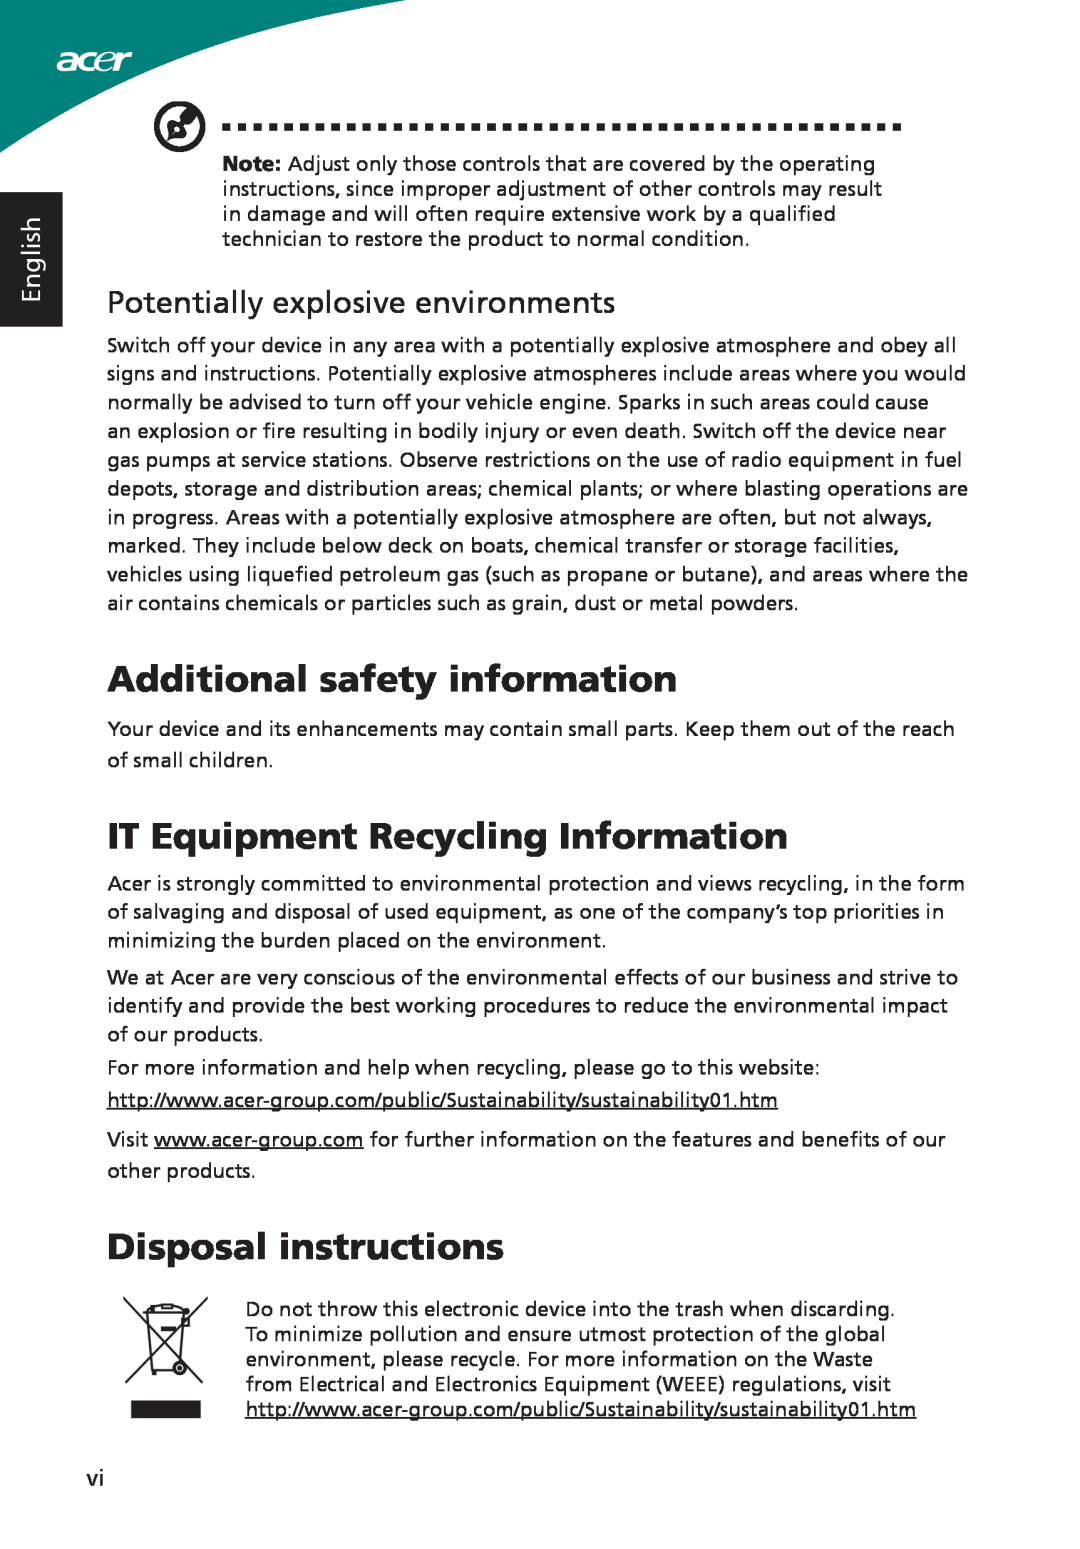 Acer ADP-40PH BB, S230HL Additional safety information, IT Equipment Recycling Information, Disposal instructions, English 